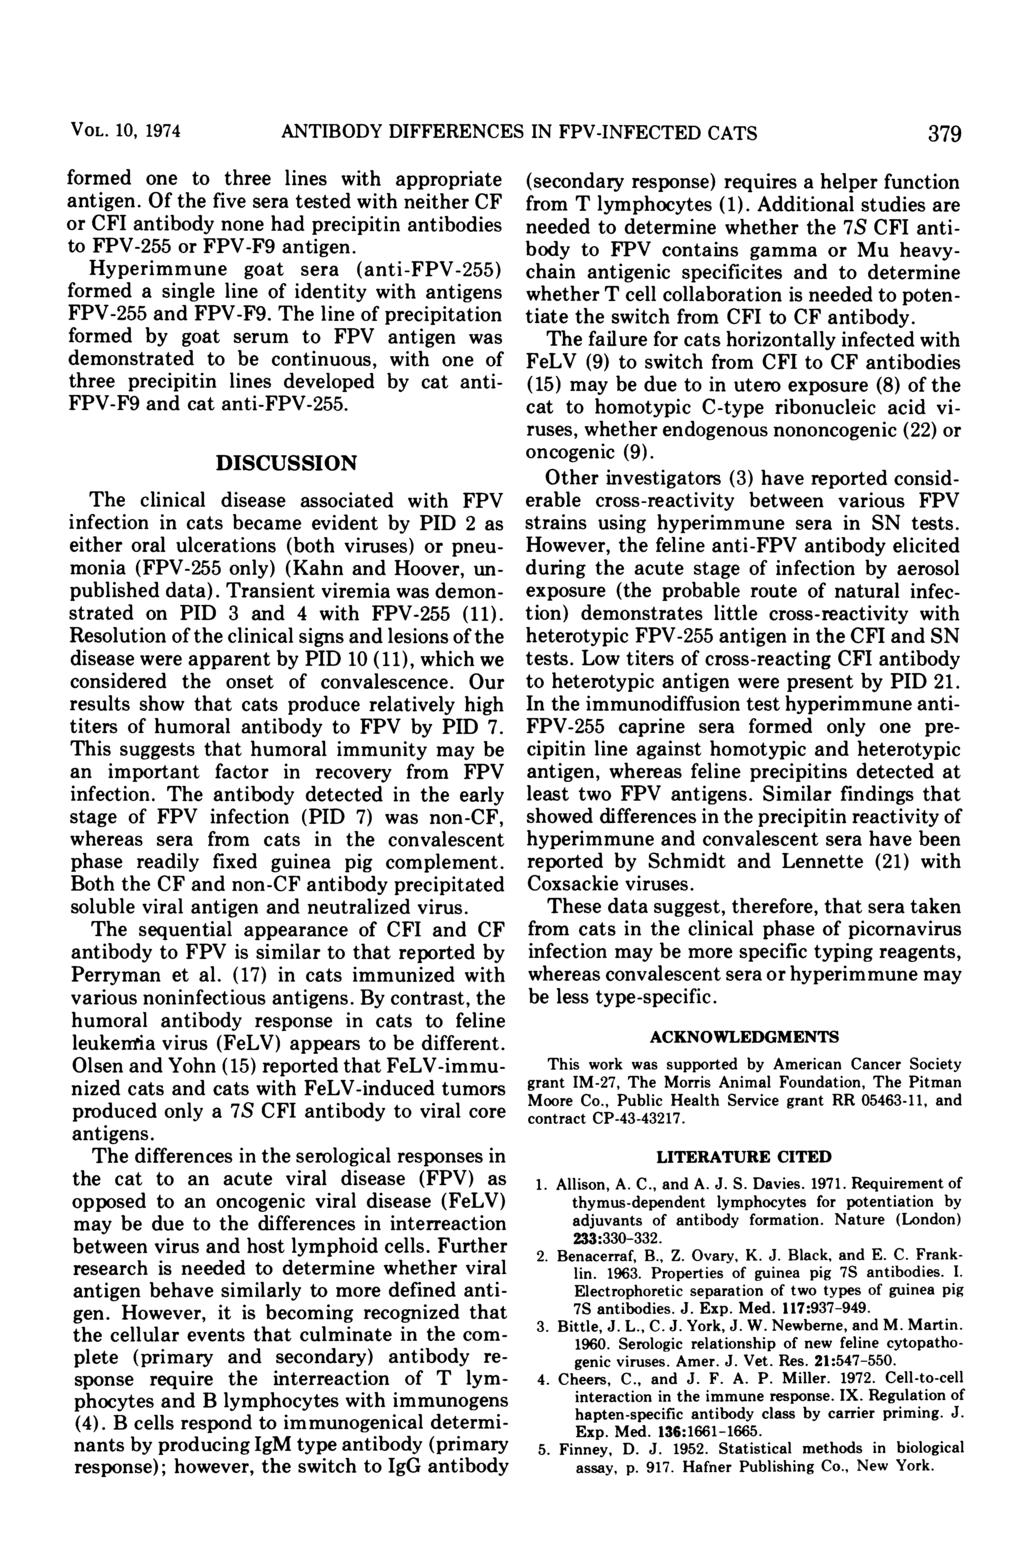 VOL. 10, 1974 ANTIBODY DIFFERENCES IN FPV-INFECTED CATS 379 formed one to three lines with appropriate antigen.